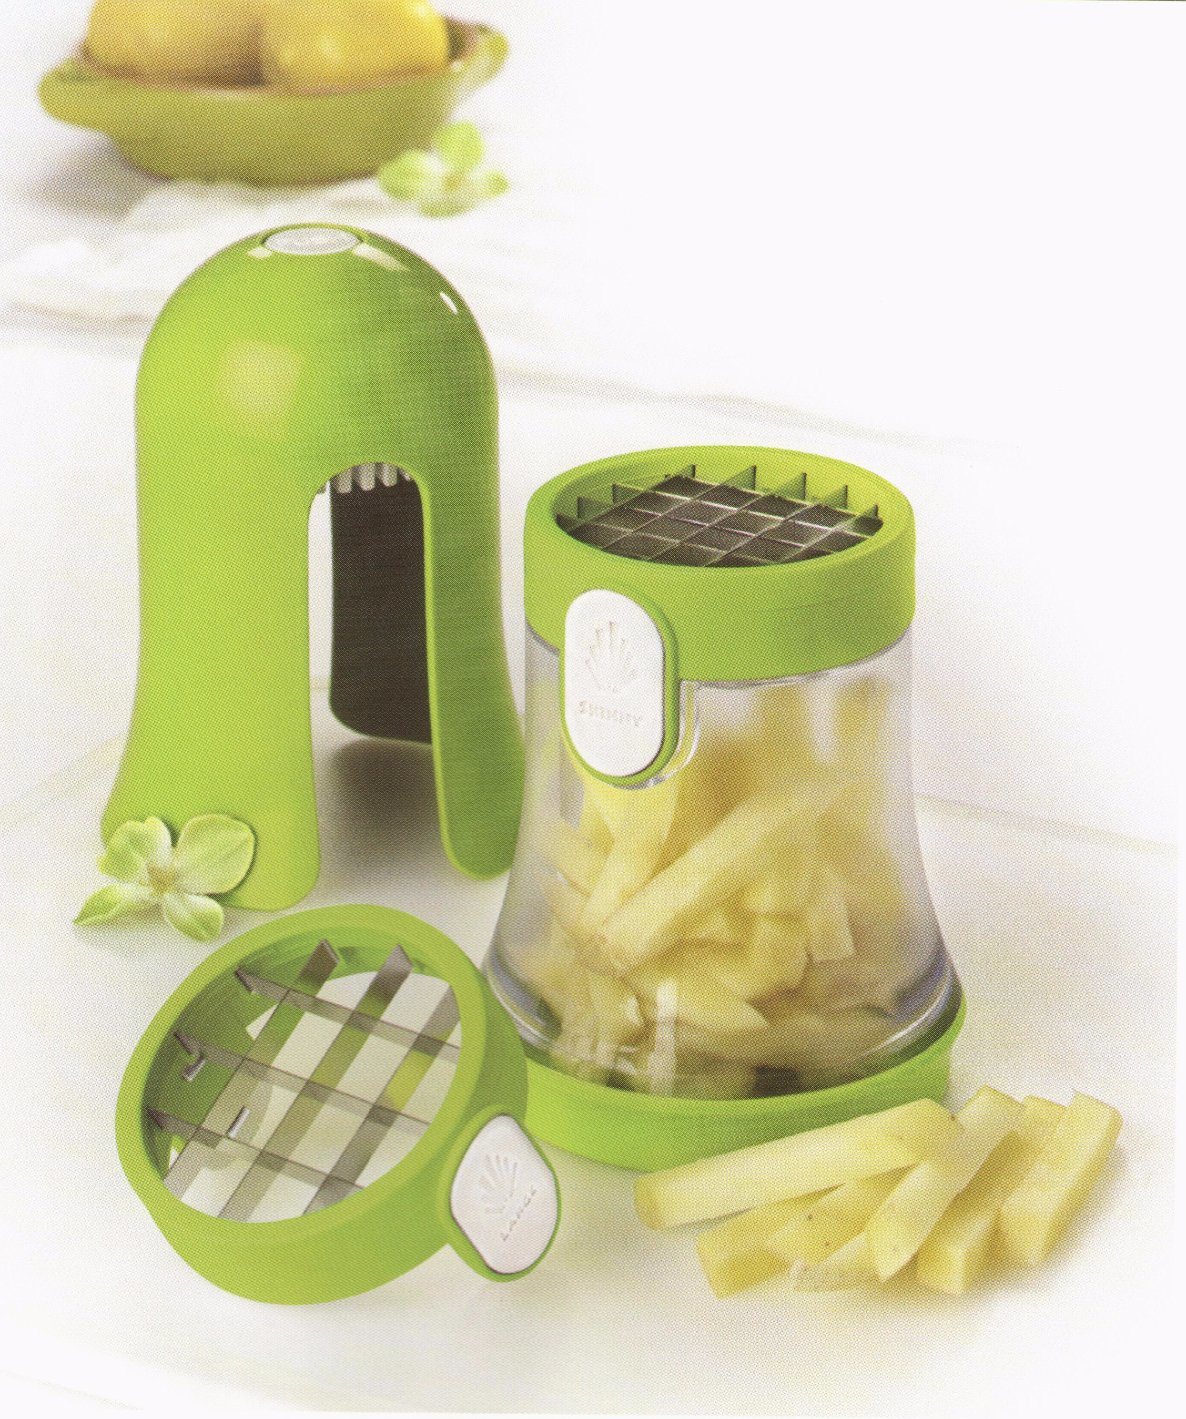 2 in 1 Fashion Plastic Vegetable Cutting Food Chopper Dice and Slice Machine Cg074